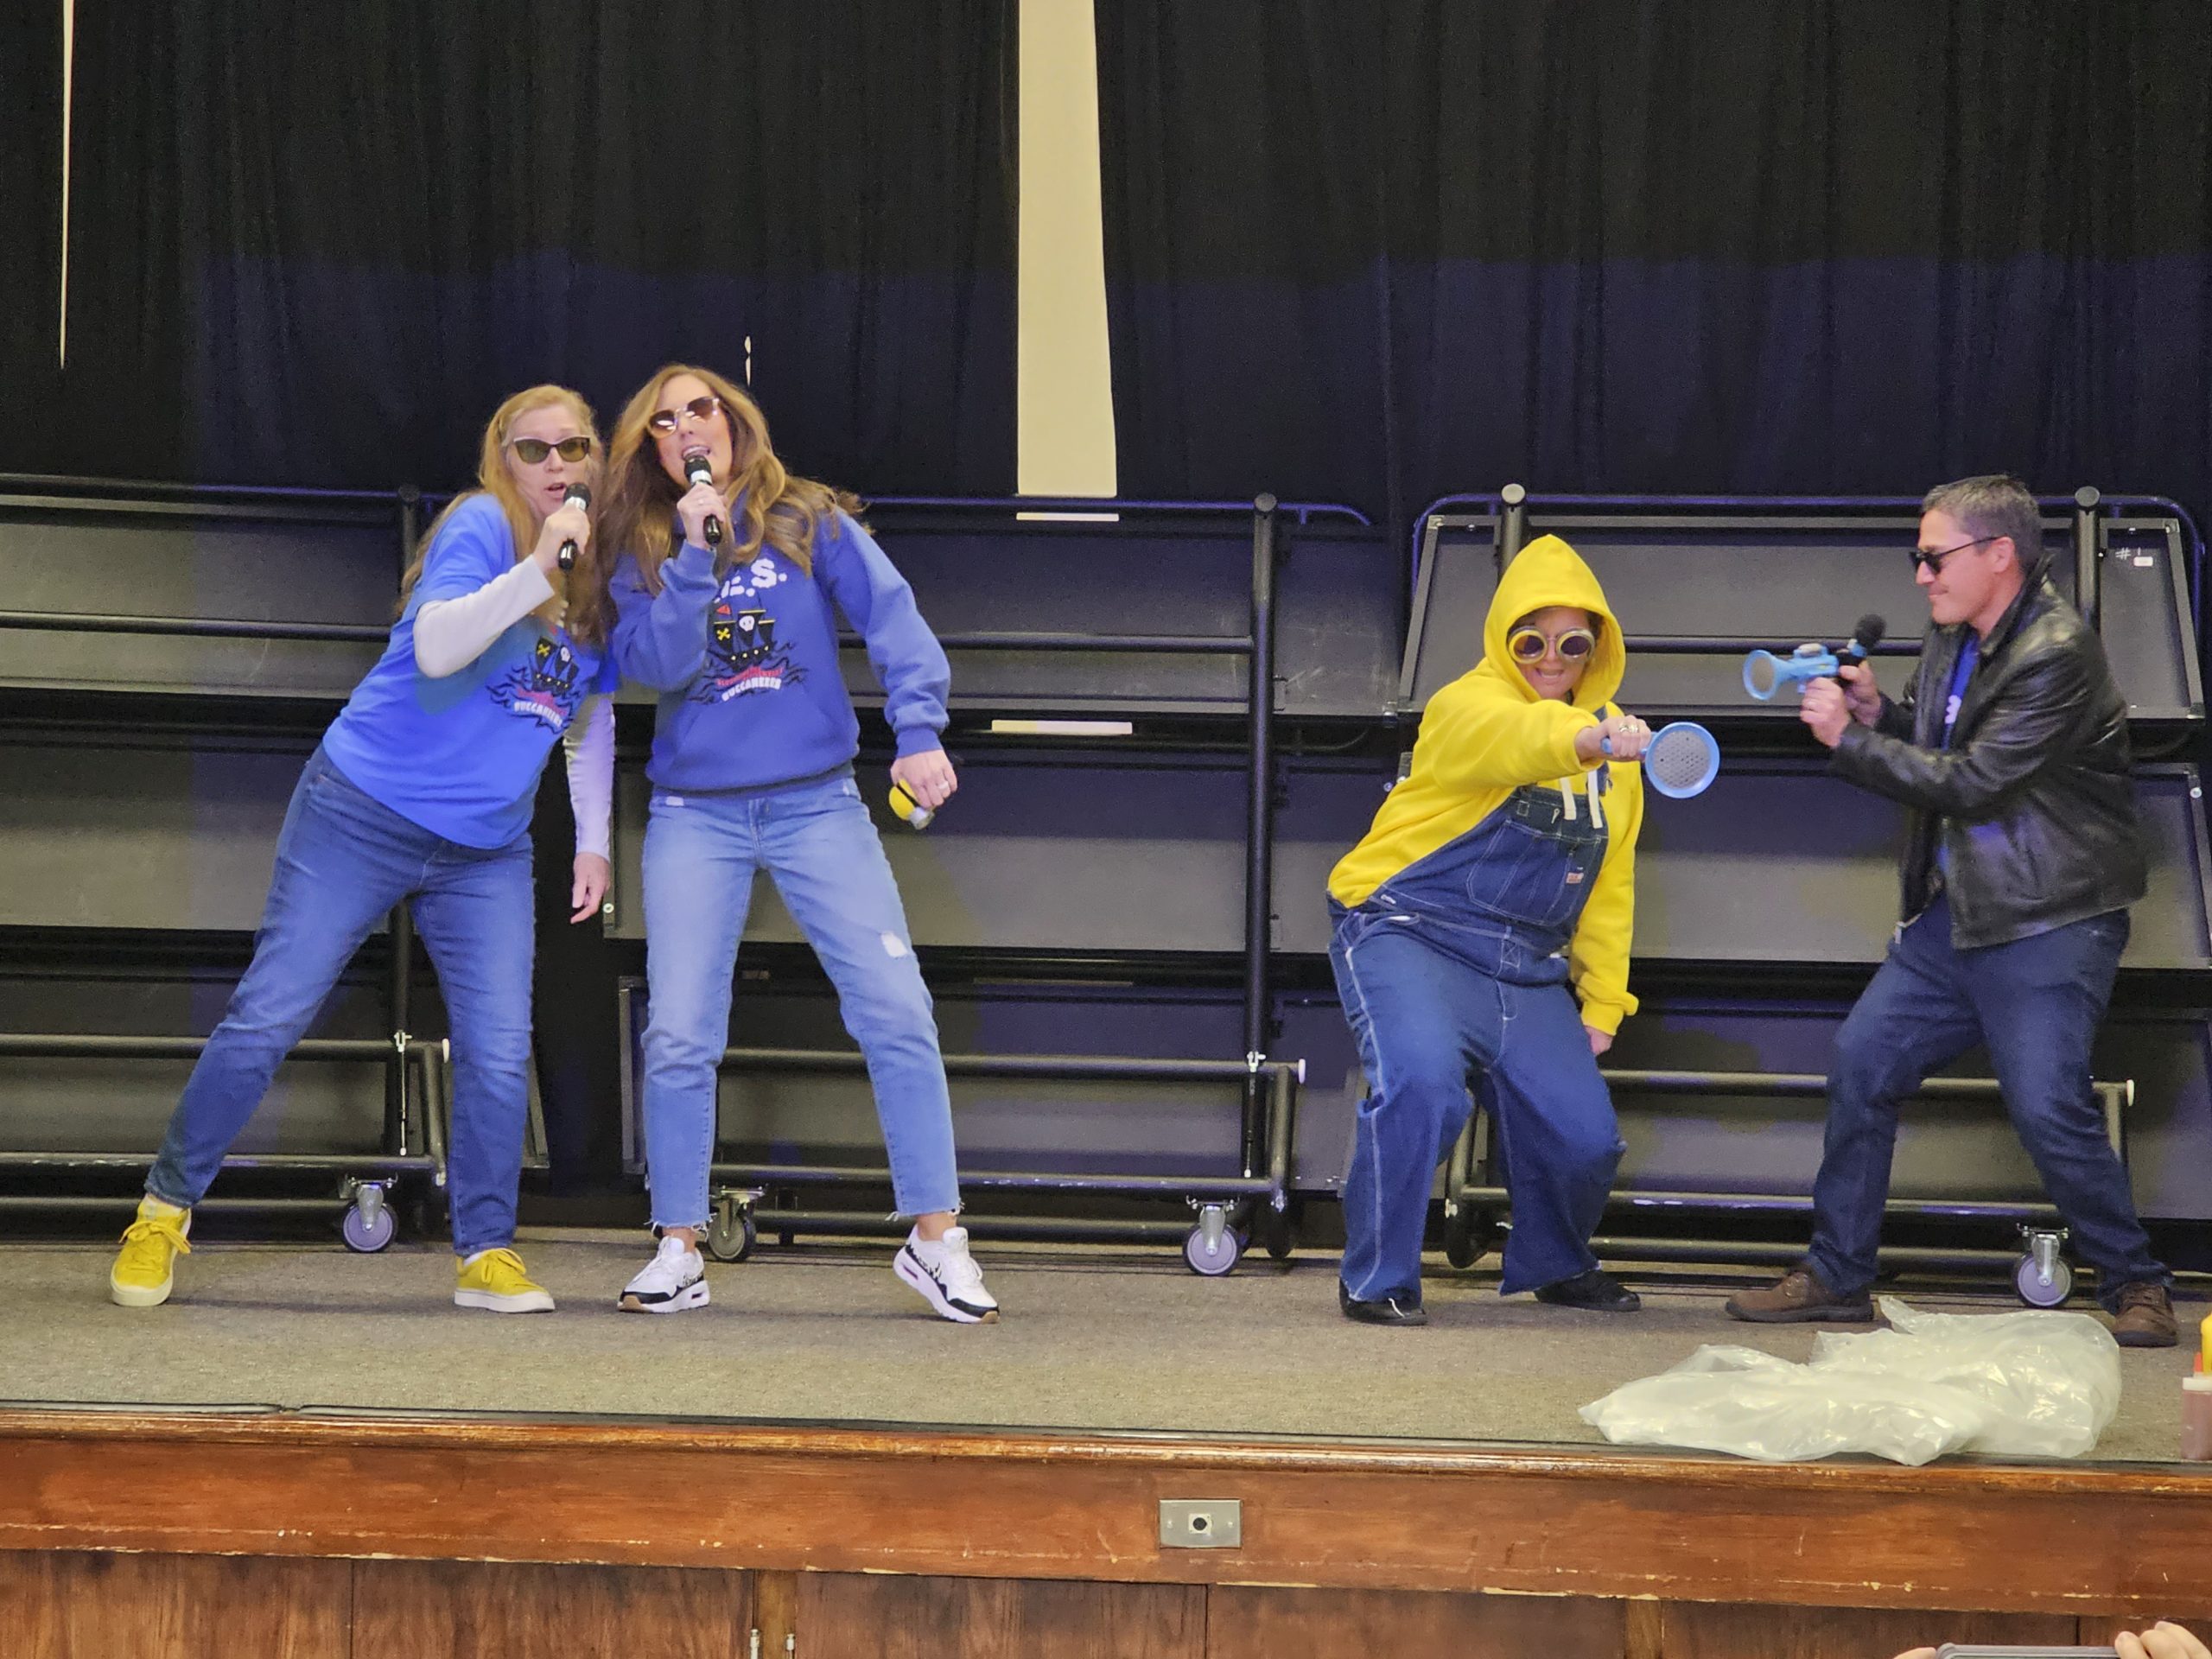 Staff members singing and dancing on school stage for a fundraising activity.